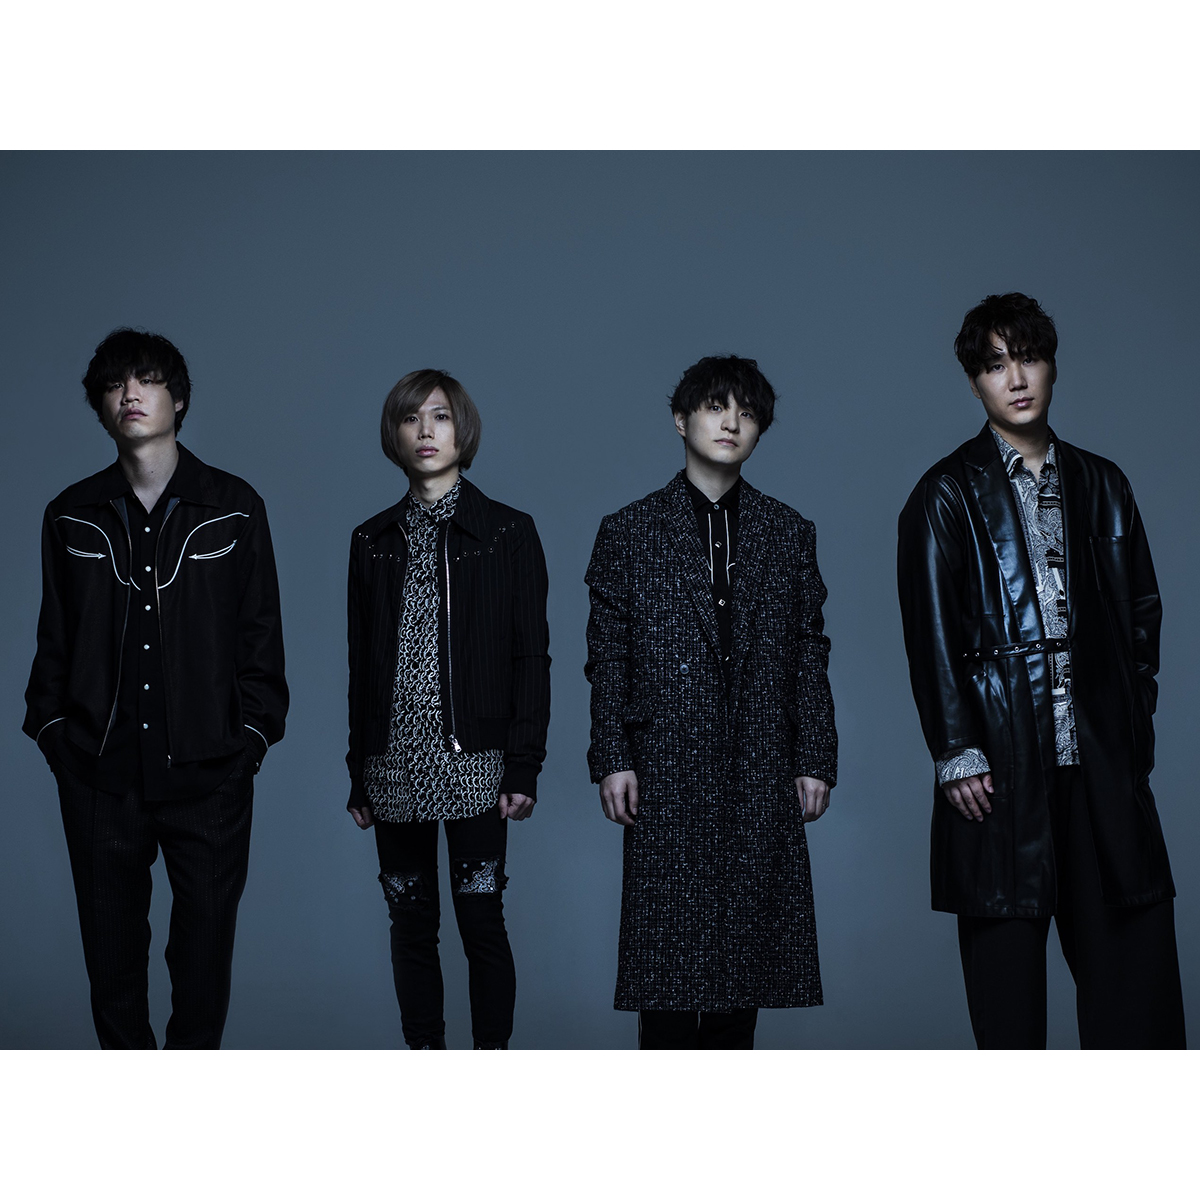 Official髭男dism、2月24日発売『映画ドラえもん のび太の宇宙小戦争 2021』主題歌の新曲「Universe」MVティザー映像公開！ - 画像一覧（1/3）